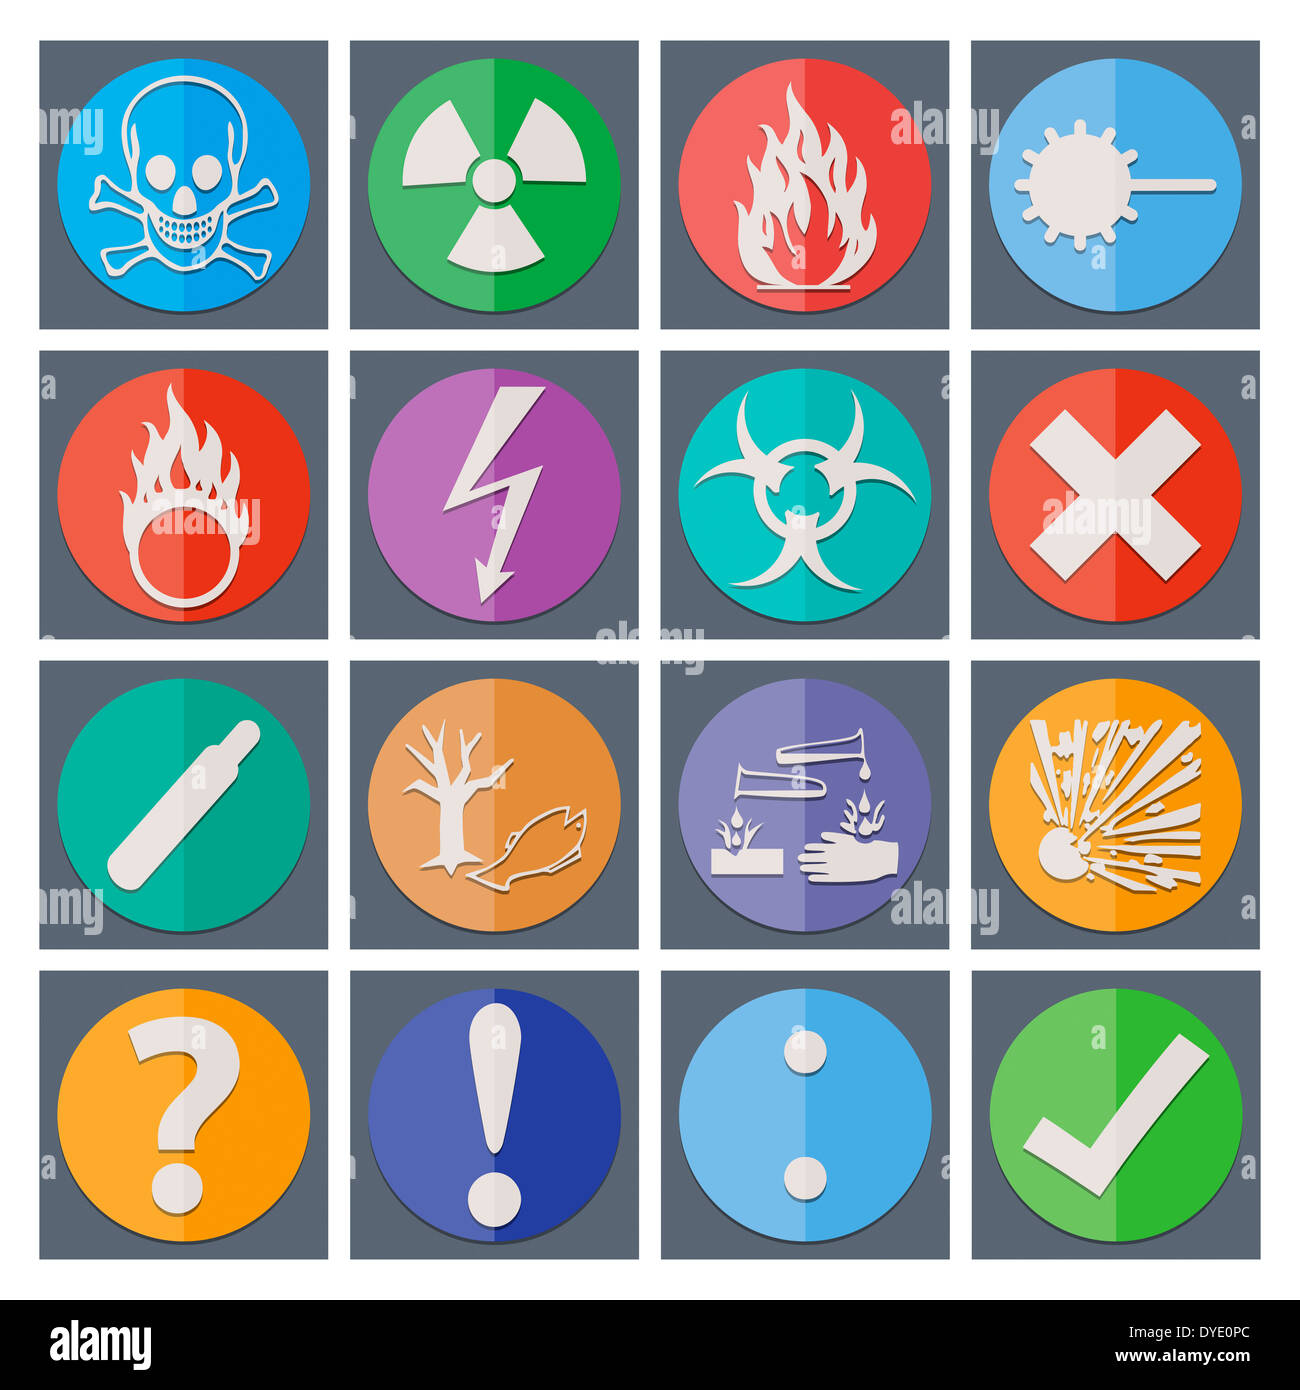 Colored Danger sticker icons and symbols Stock Photo